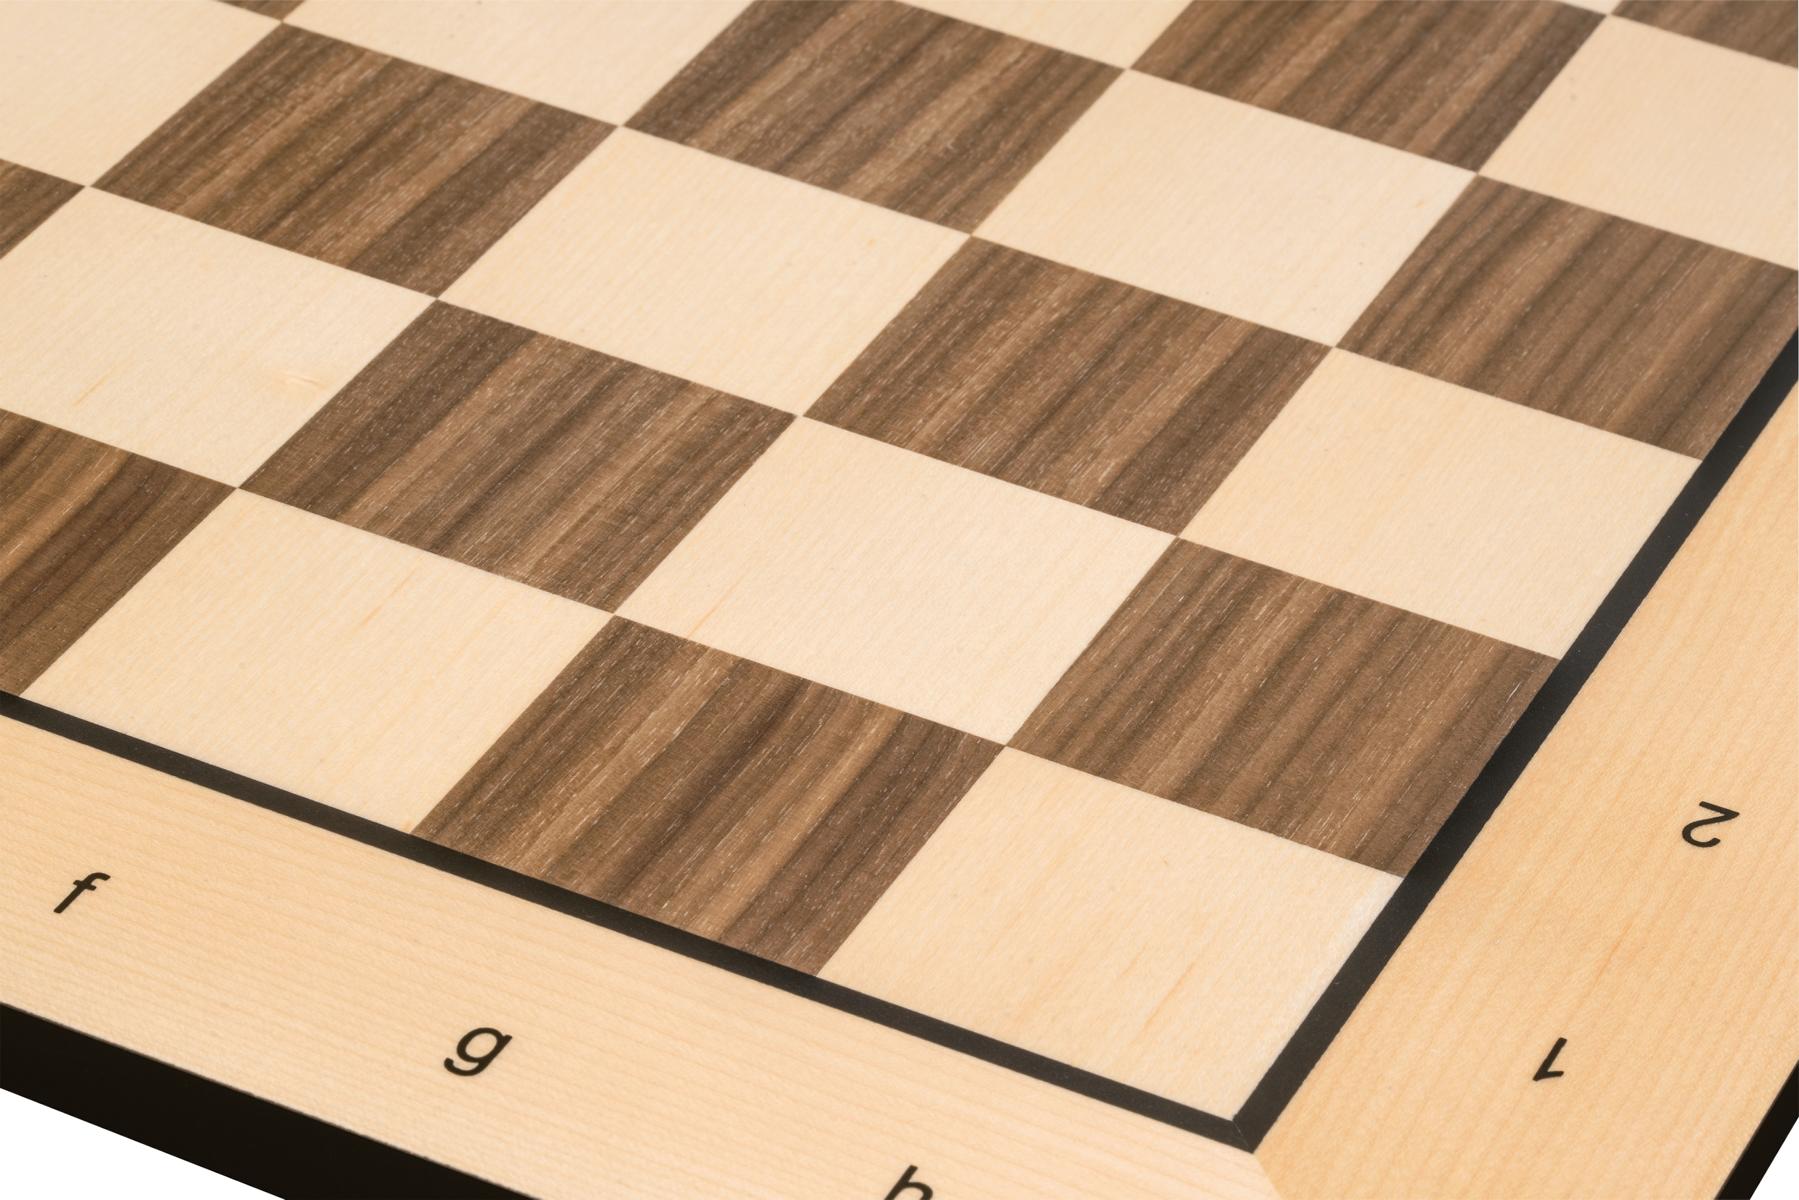 Chessboard Belgrad, field 50 mm, with numbers and letters